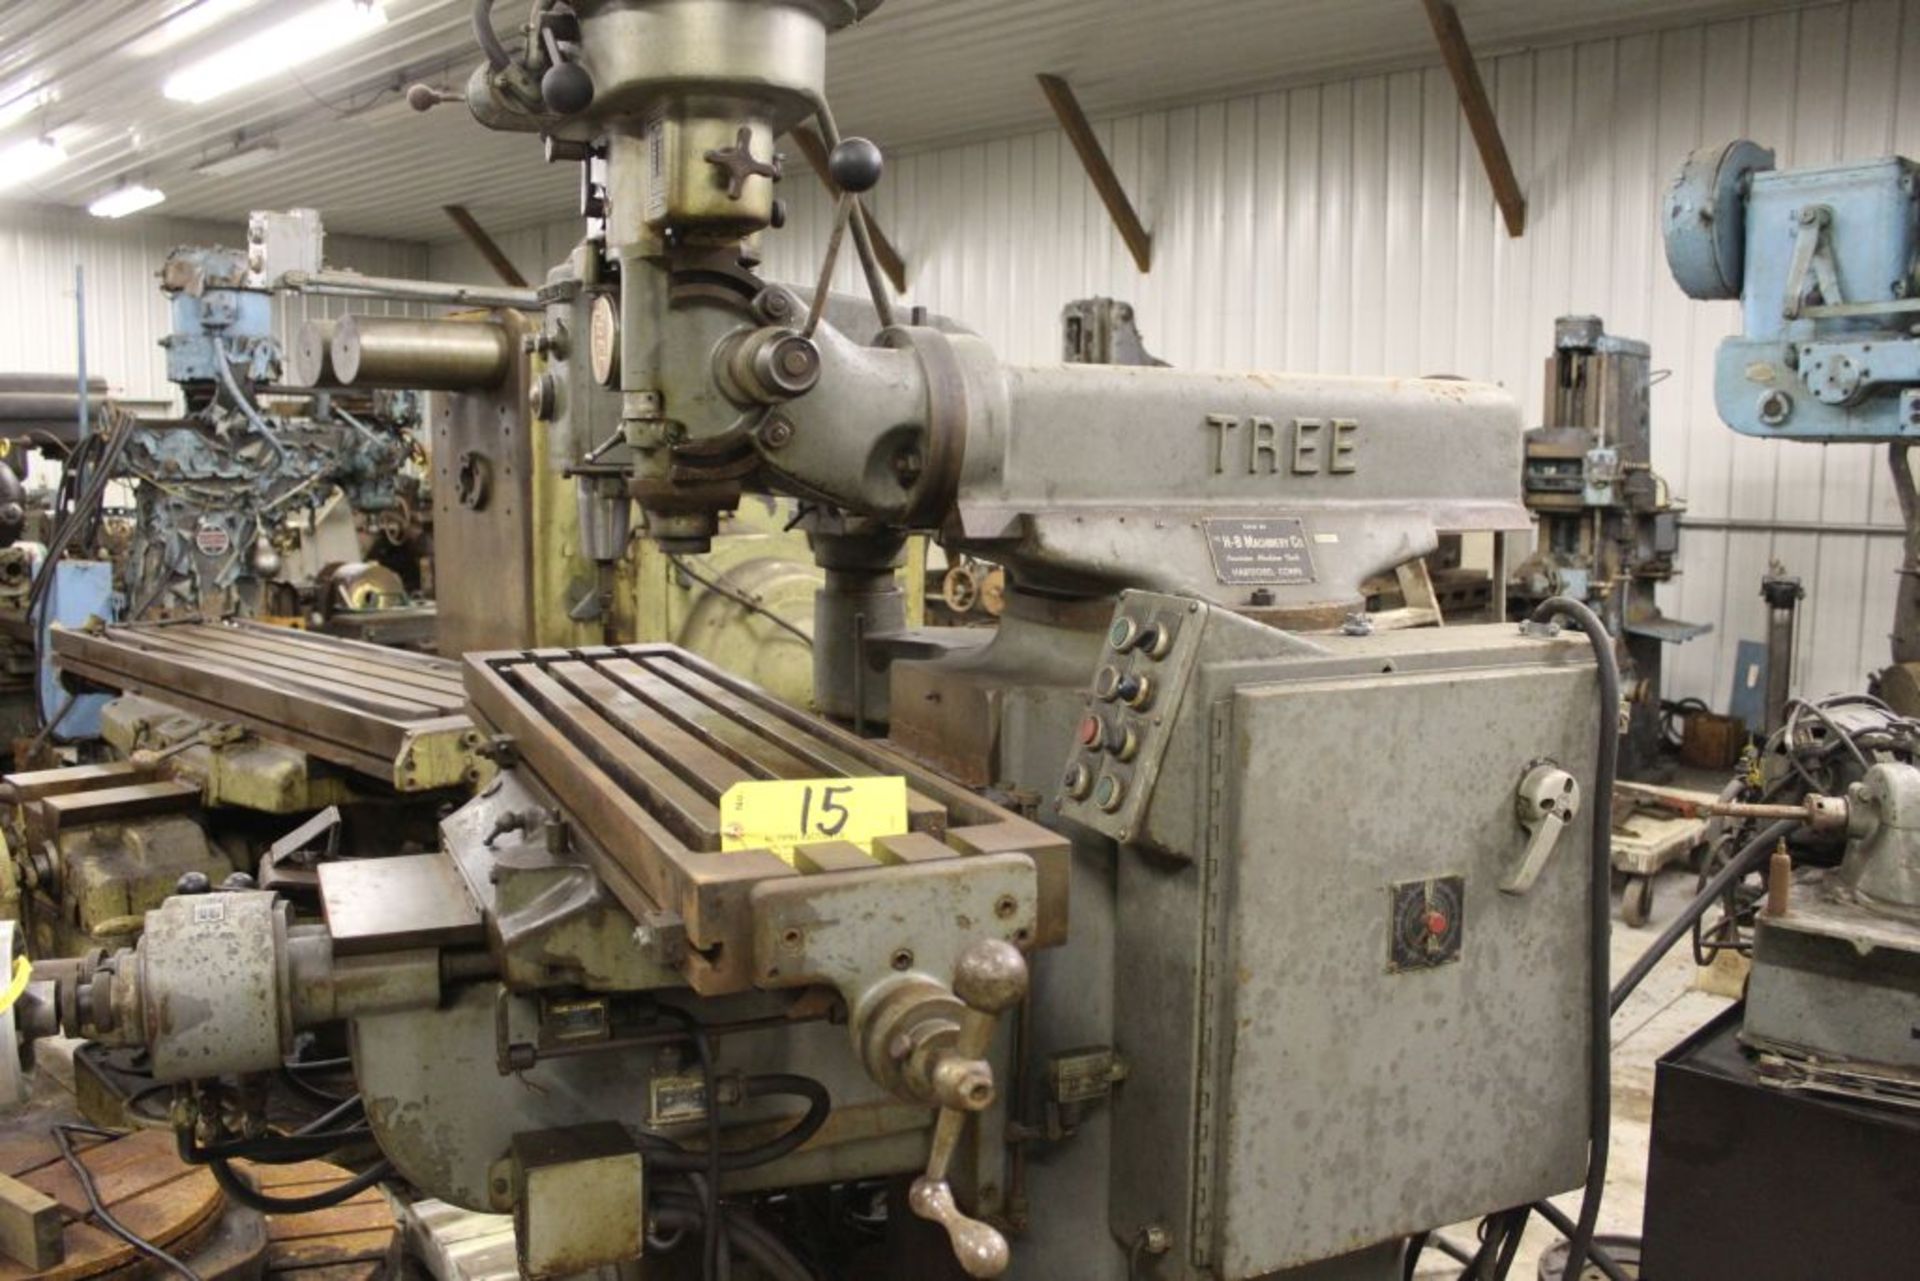 Tree mill, model 2UVR, 10.5" x 42" bed, power feed, Scan-O-Matic tracing attachment.